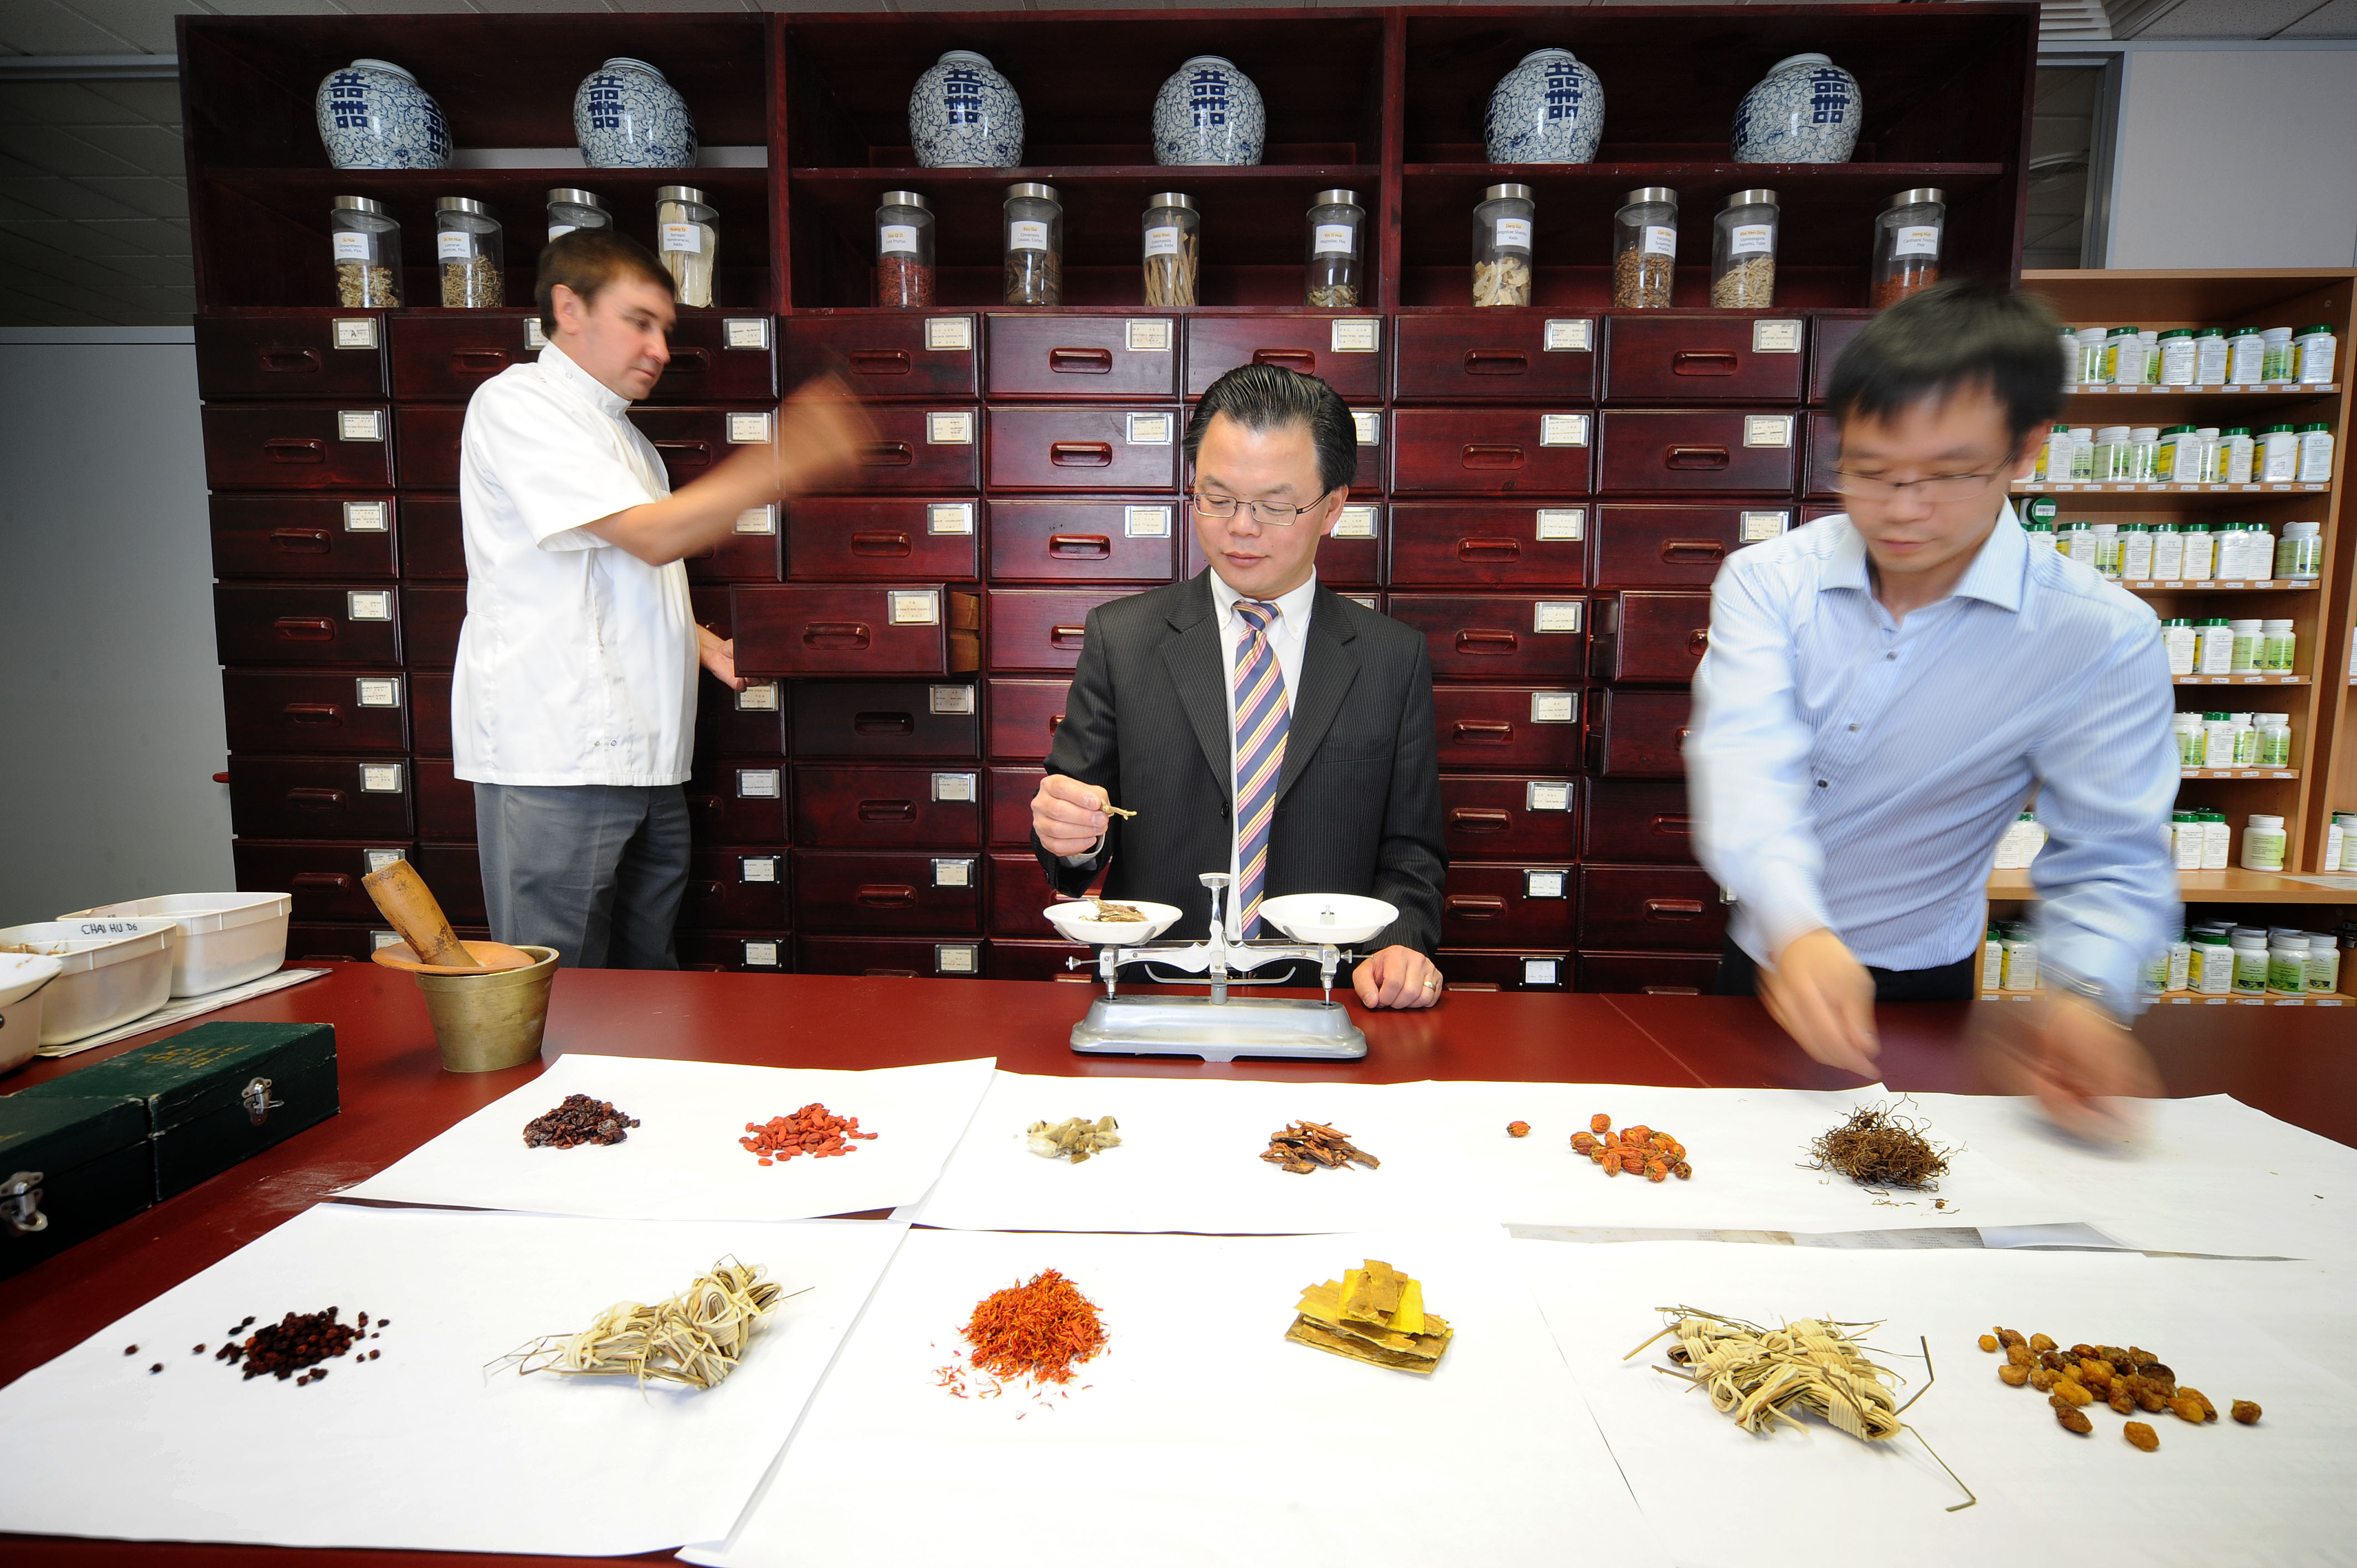 researchers weighing various herbs on a set of scales